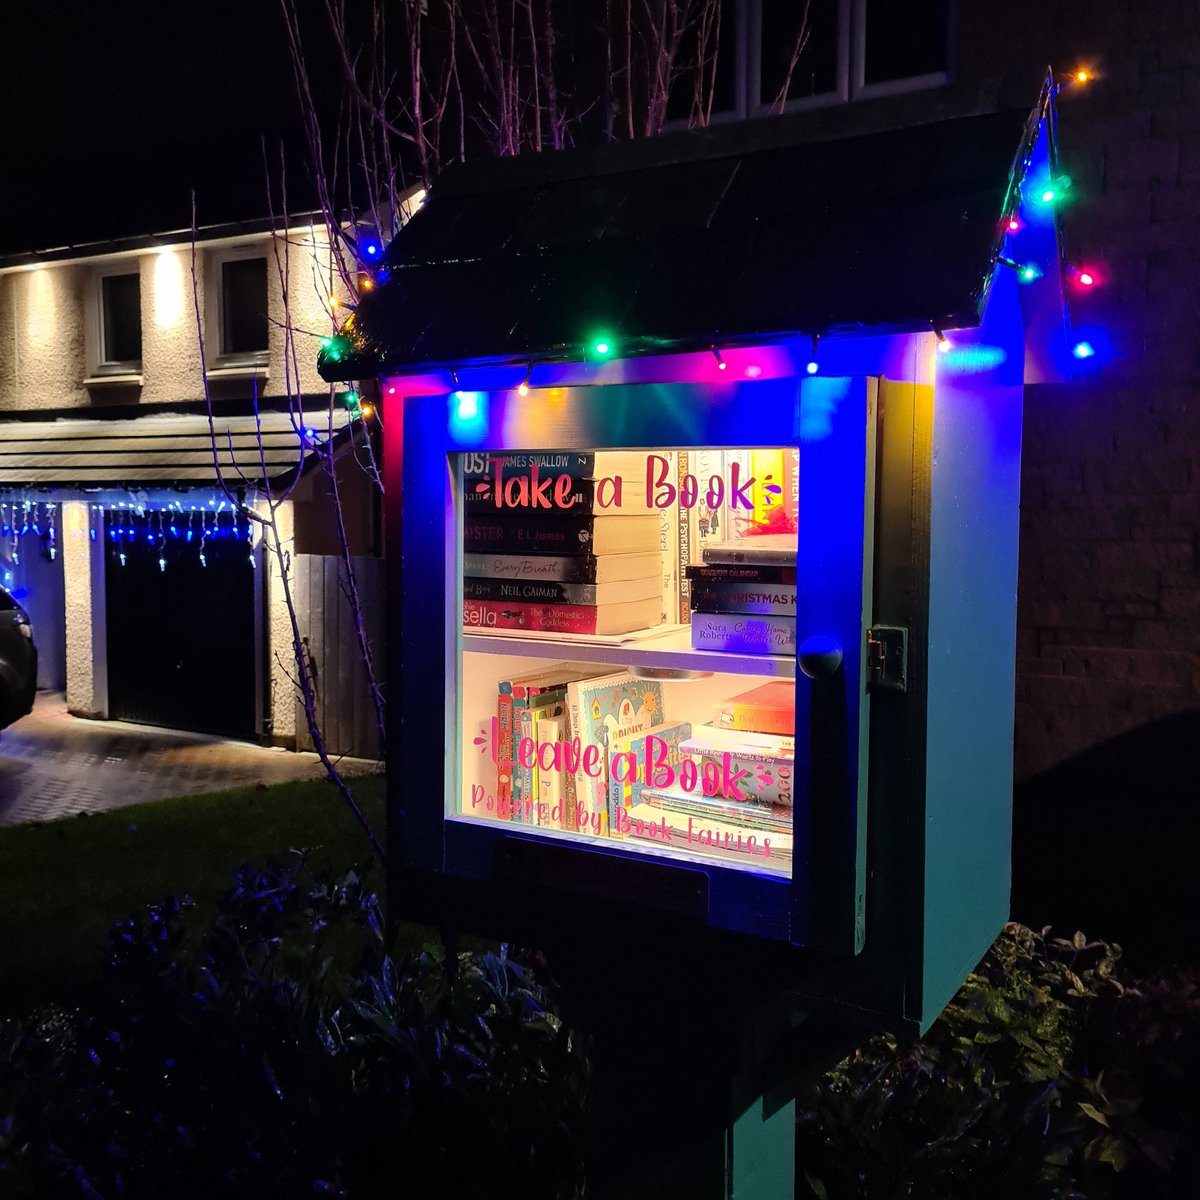 The Little Book House is full! Pop by to pick up a book or two for the festive season. 🎄🎅

#LittleFreeLibrary #LittleFreeLibraryUK #LittleBookHouseFife #Dunfermline #ShineOnFife #TakeABookLeaveABook #UnitedByBooks #CommunityLibrary #Shelfie #IBelieveInBookFairies